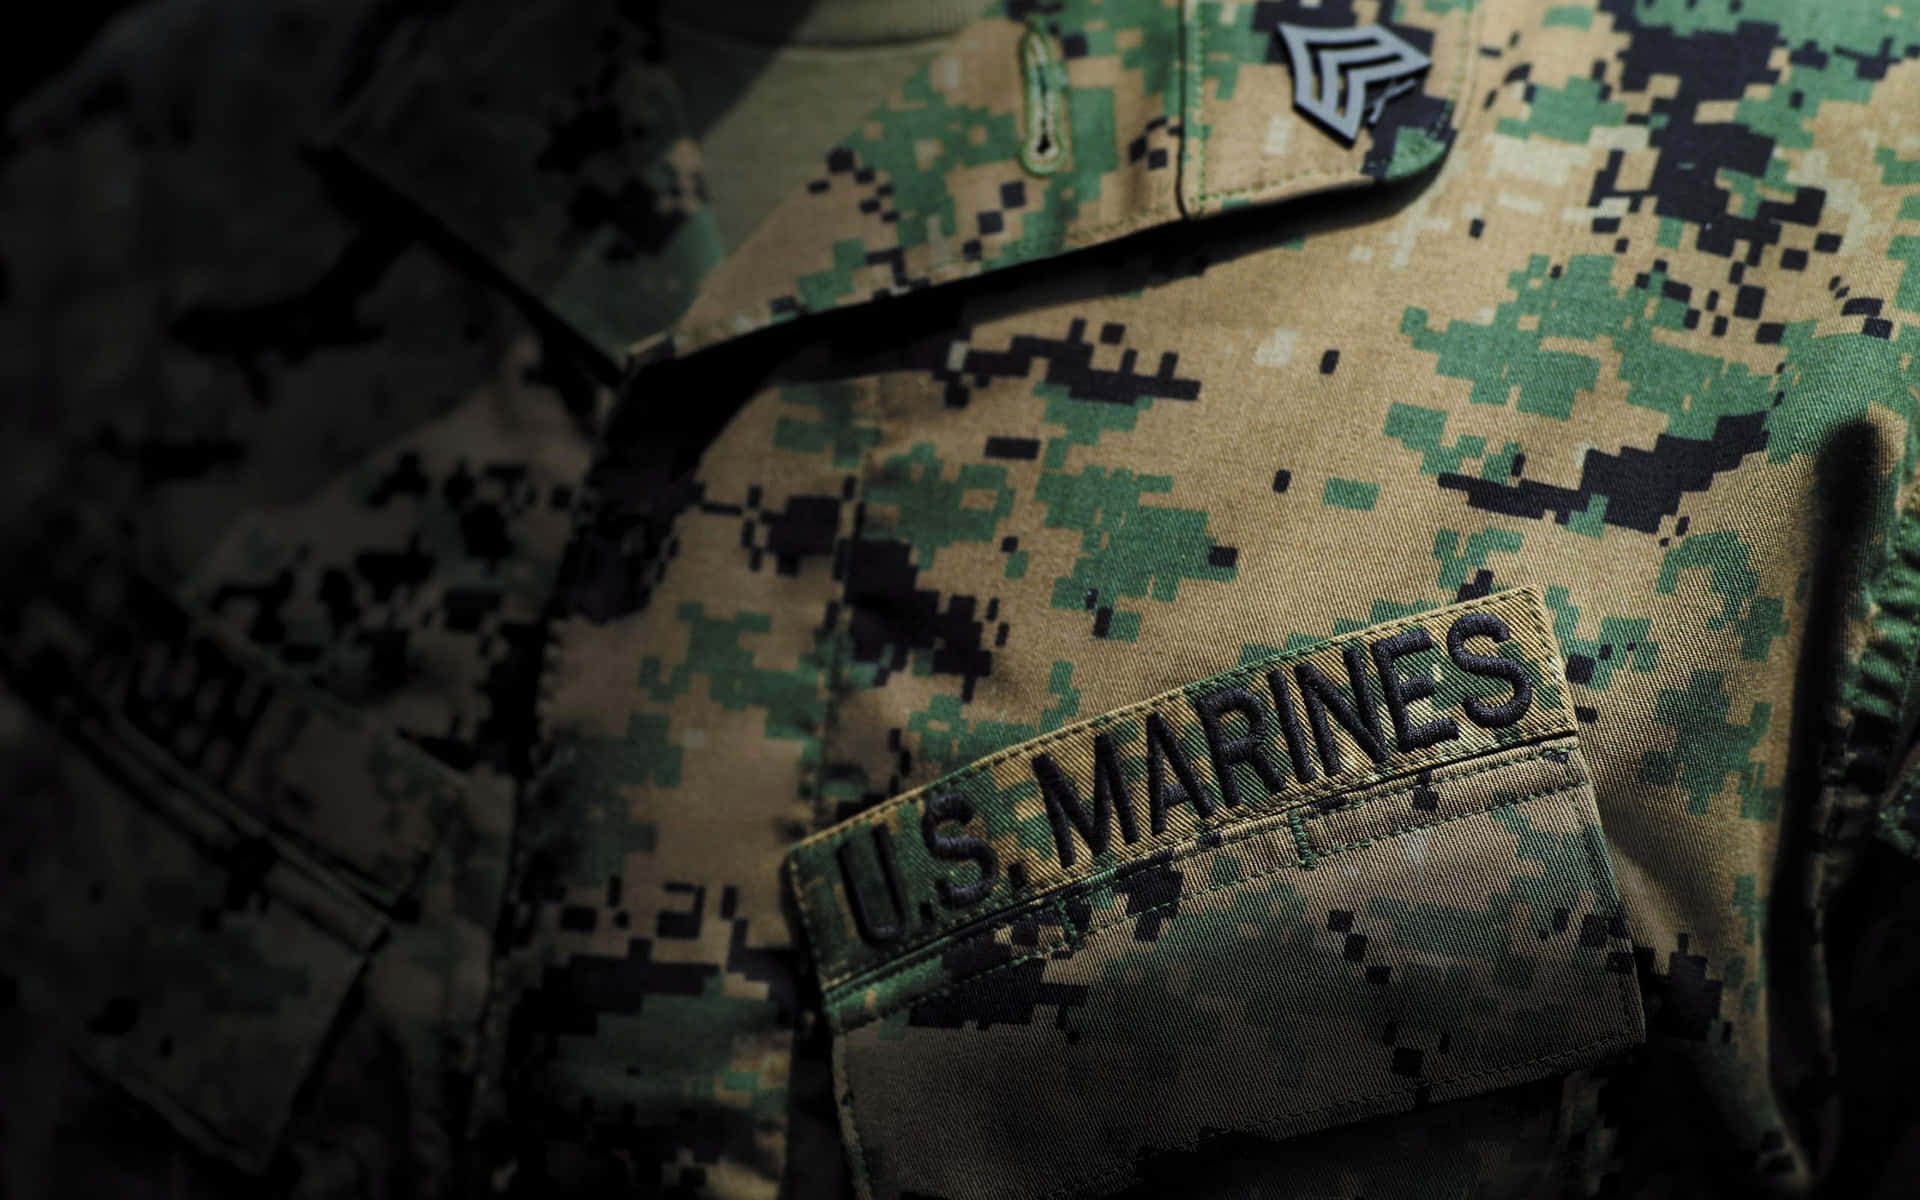 The United States Marine Corps: Always ready to serve. Wallpaper